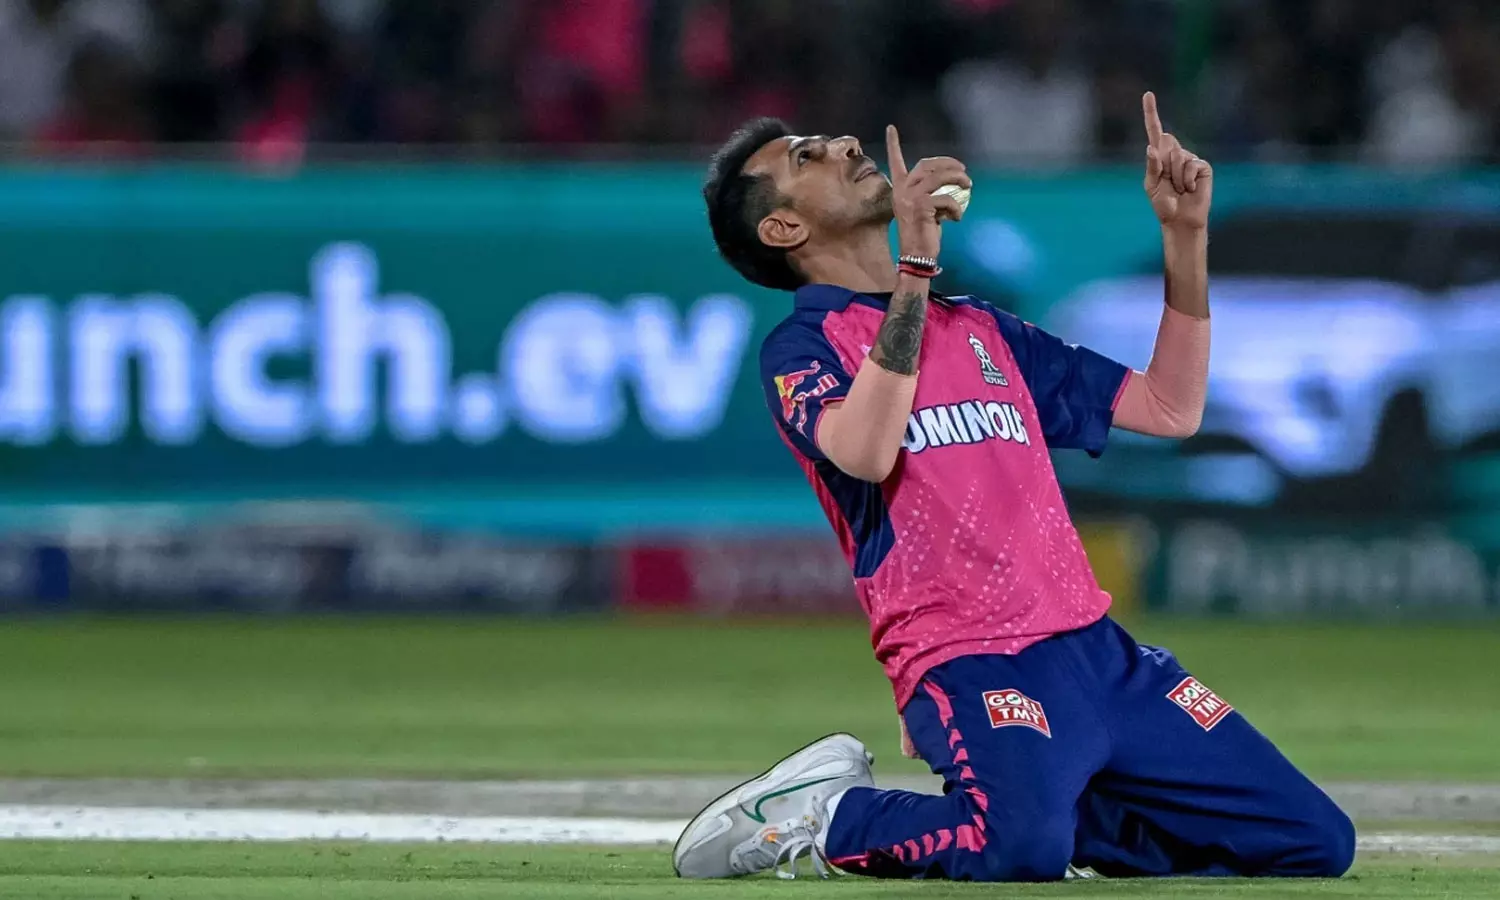 [WATCH] Chahal Mimics Messi’s Celebration After Taking His 200th IPL Wicket